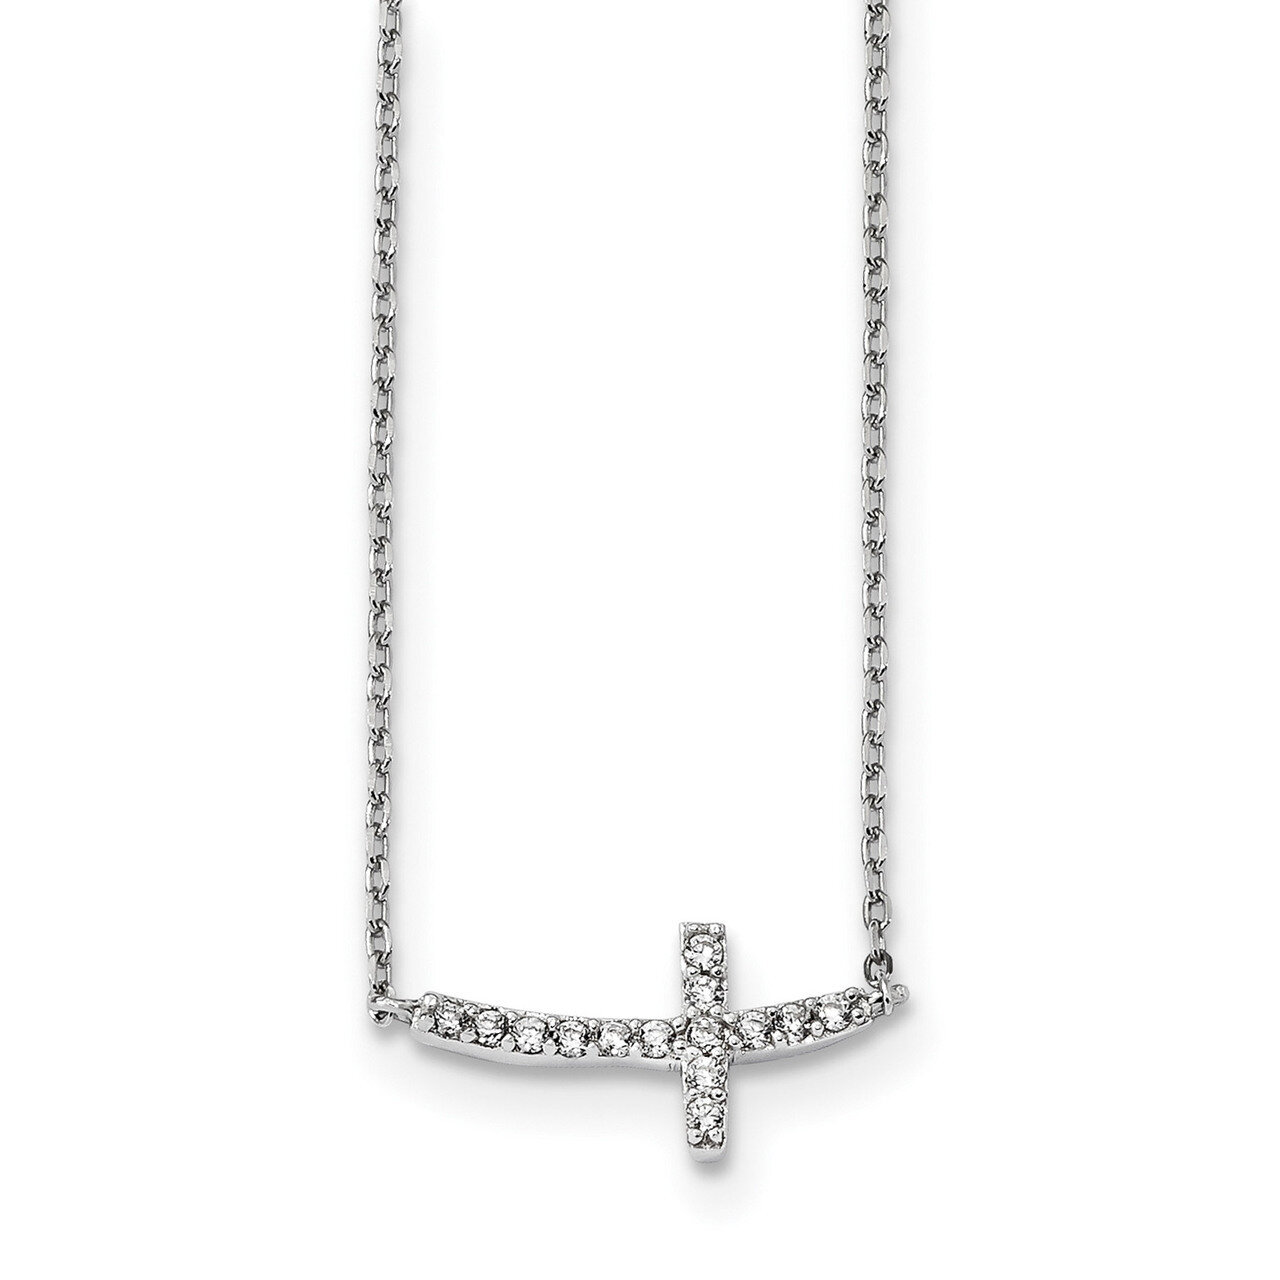 CZ Diamond Cross with 2 inch ext Necklace 16 Inch Sterling Silver Rhodium-plated QG4406-16